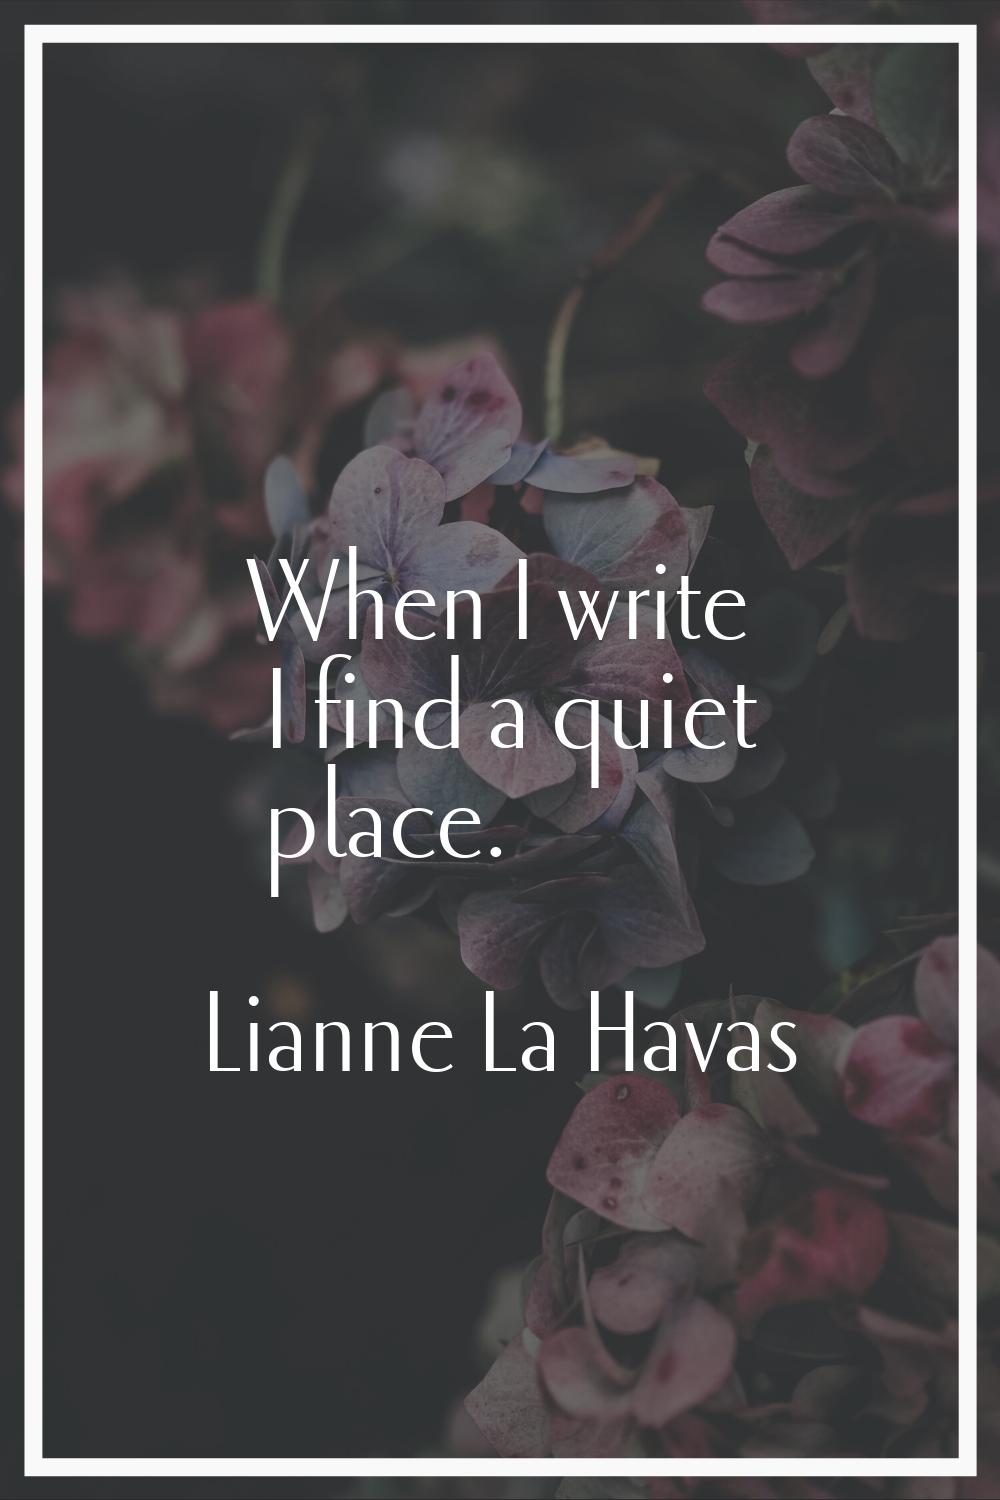 When I write I find a quiet place.